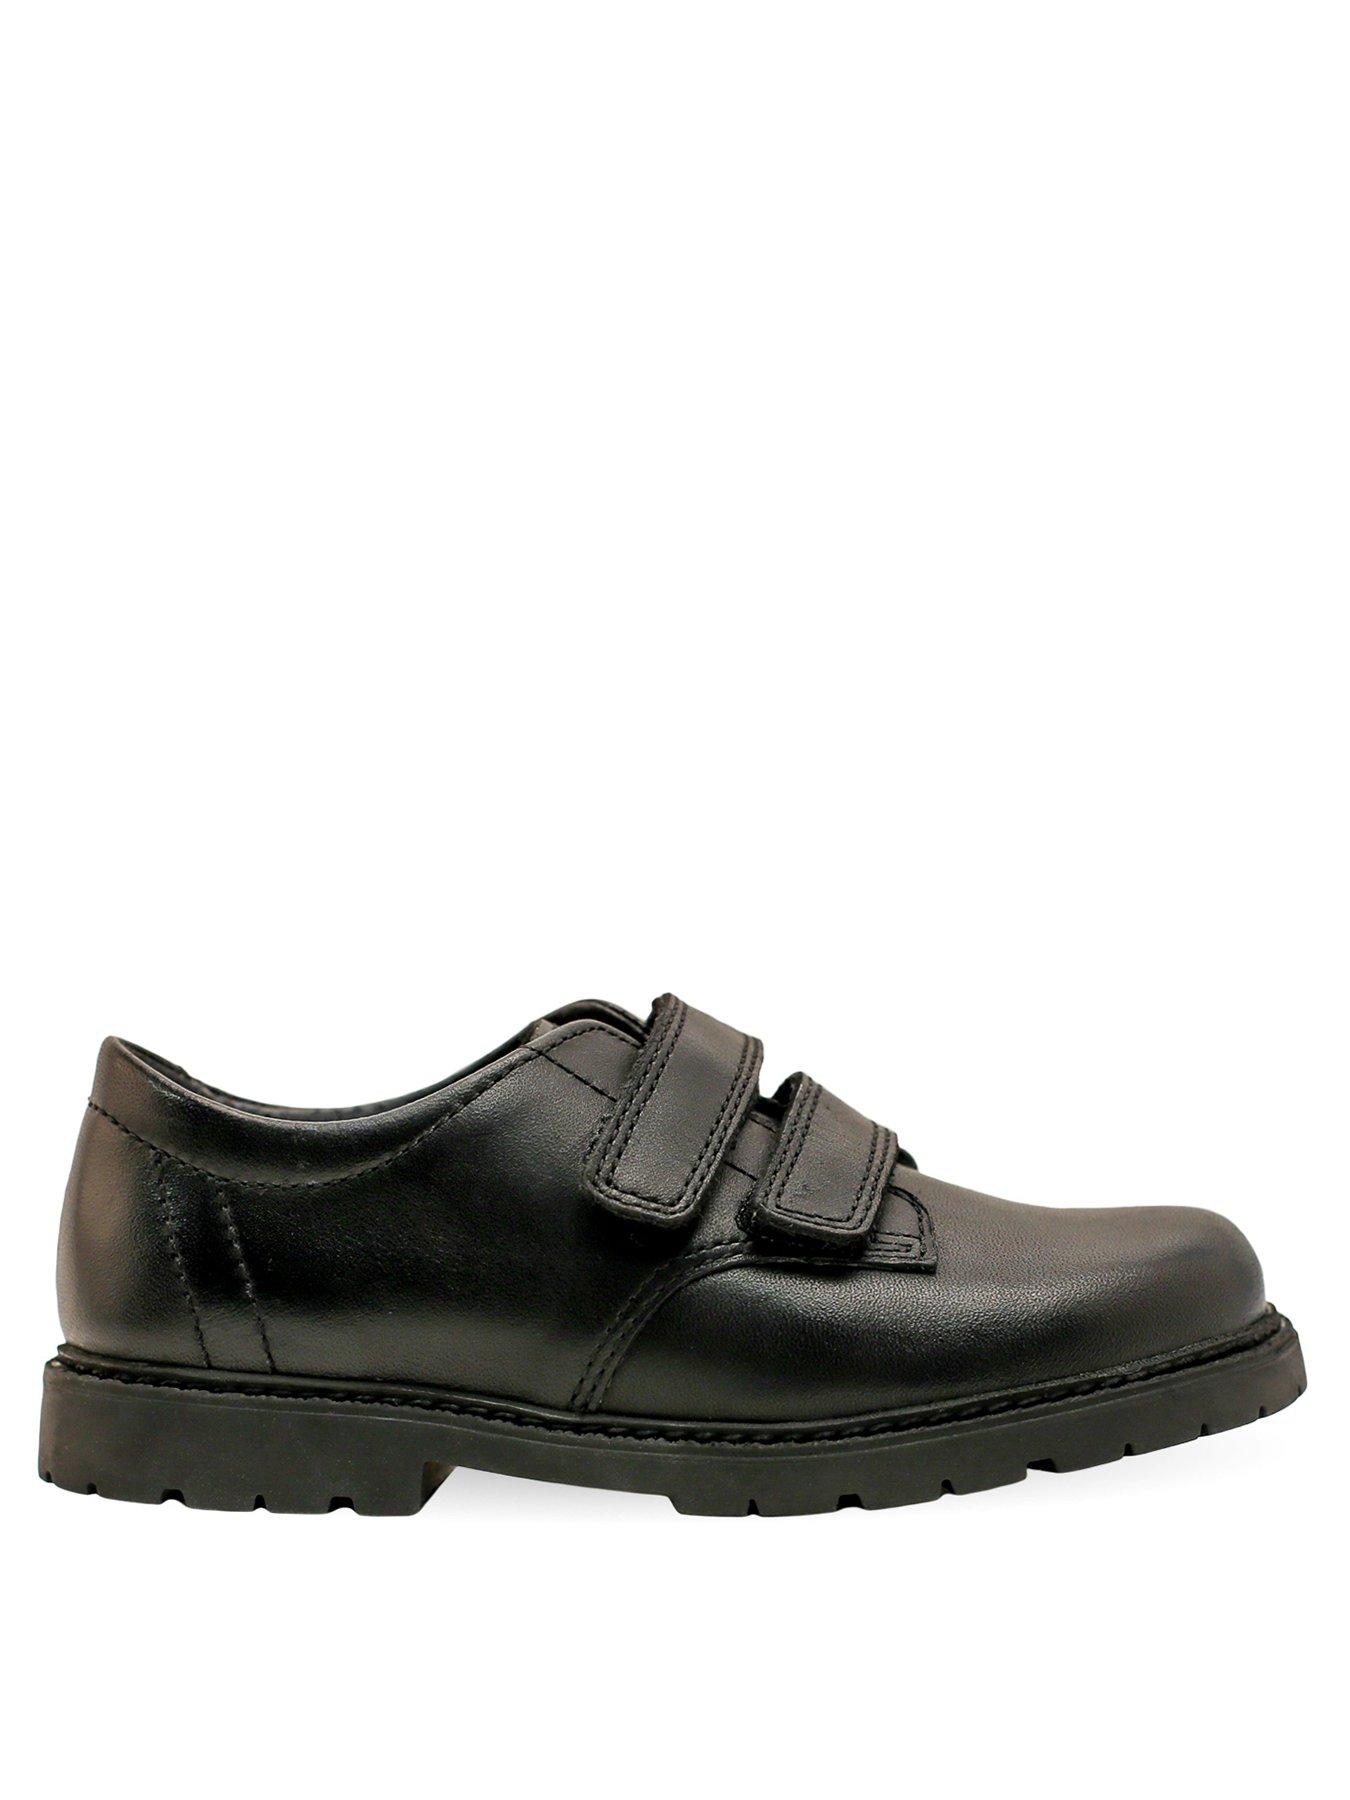 Boys Clarks Squared Toe Hook & Loop Quality Leather Classic School Shoes Deaton 